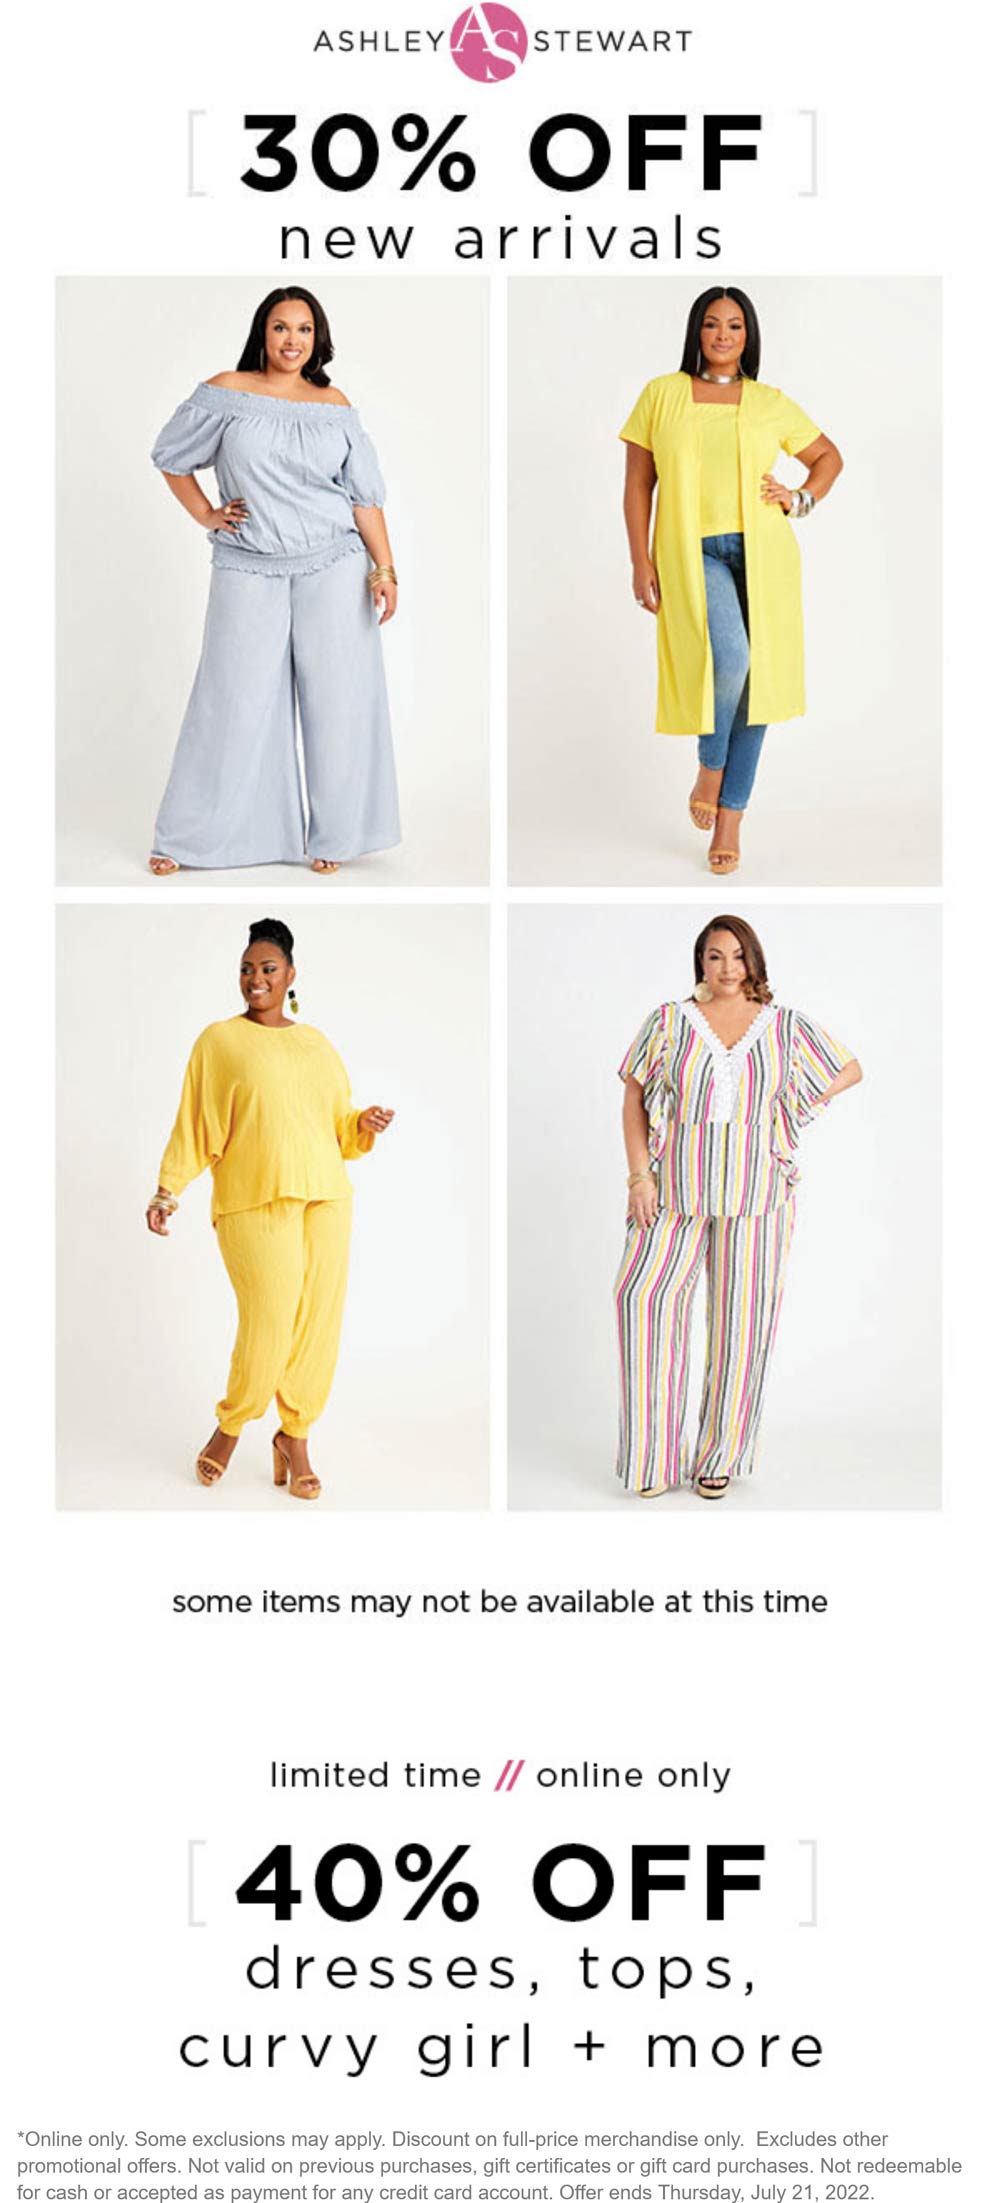 Ashley Stewart stores Coupon  30% off new arrivals online today at Ashley Stewart #ashleystewart 